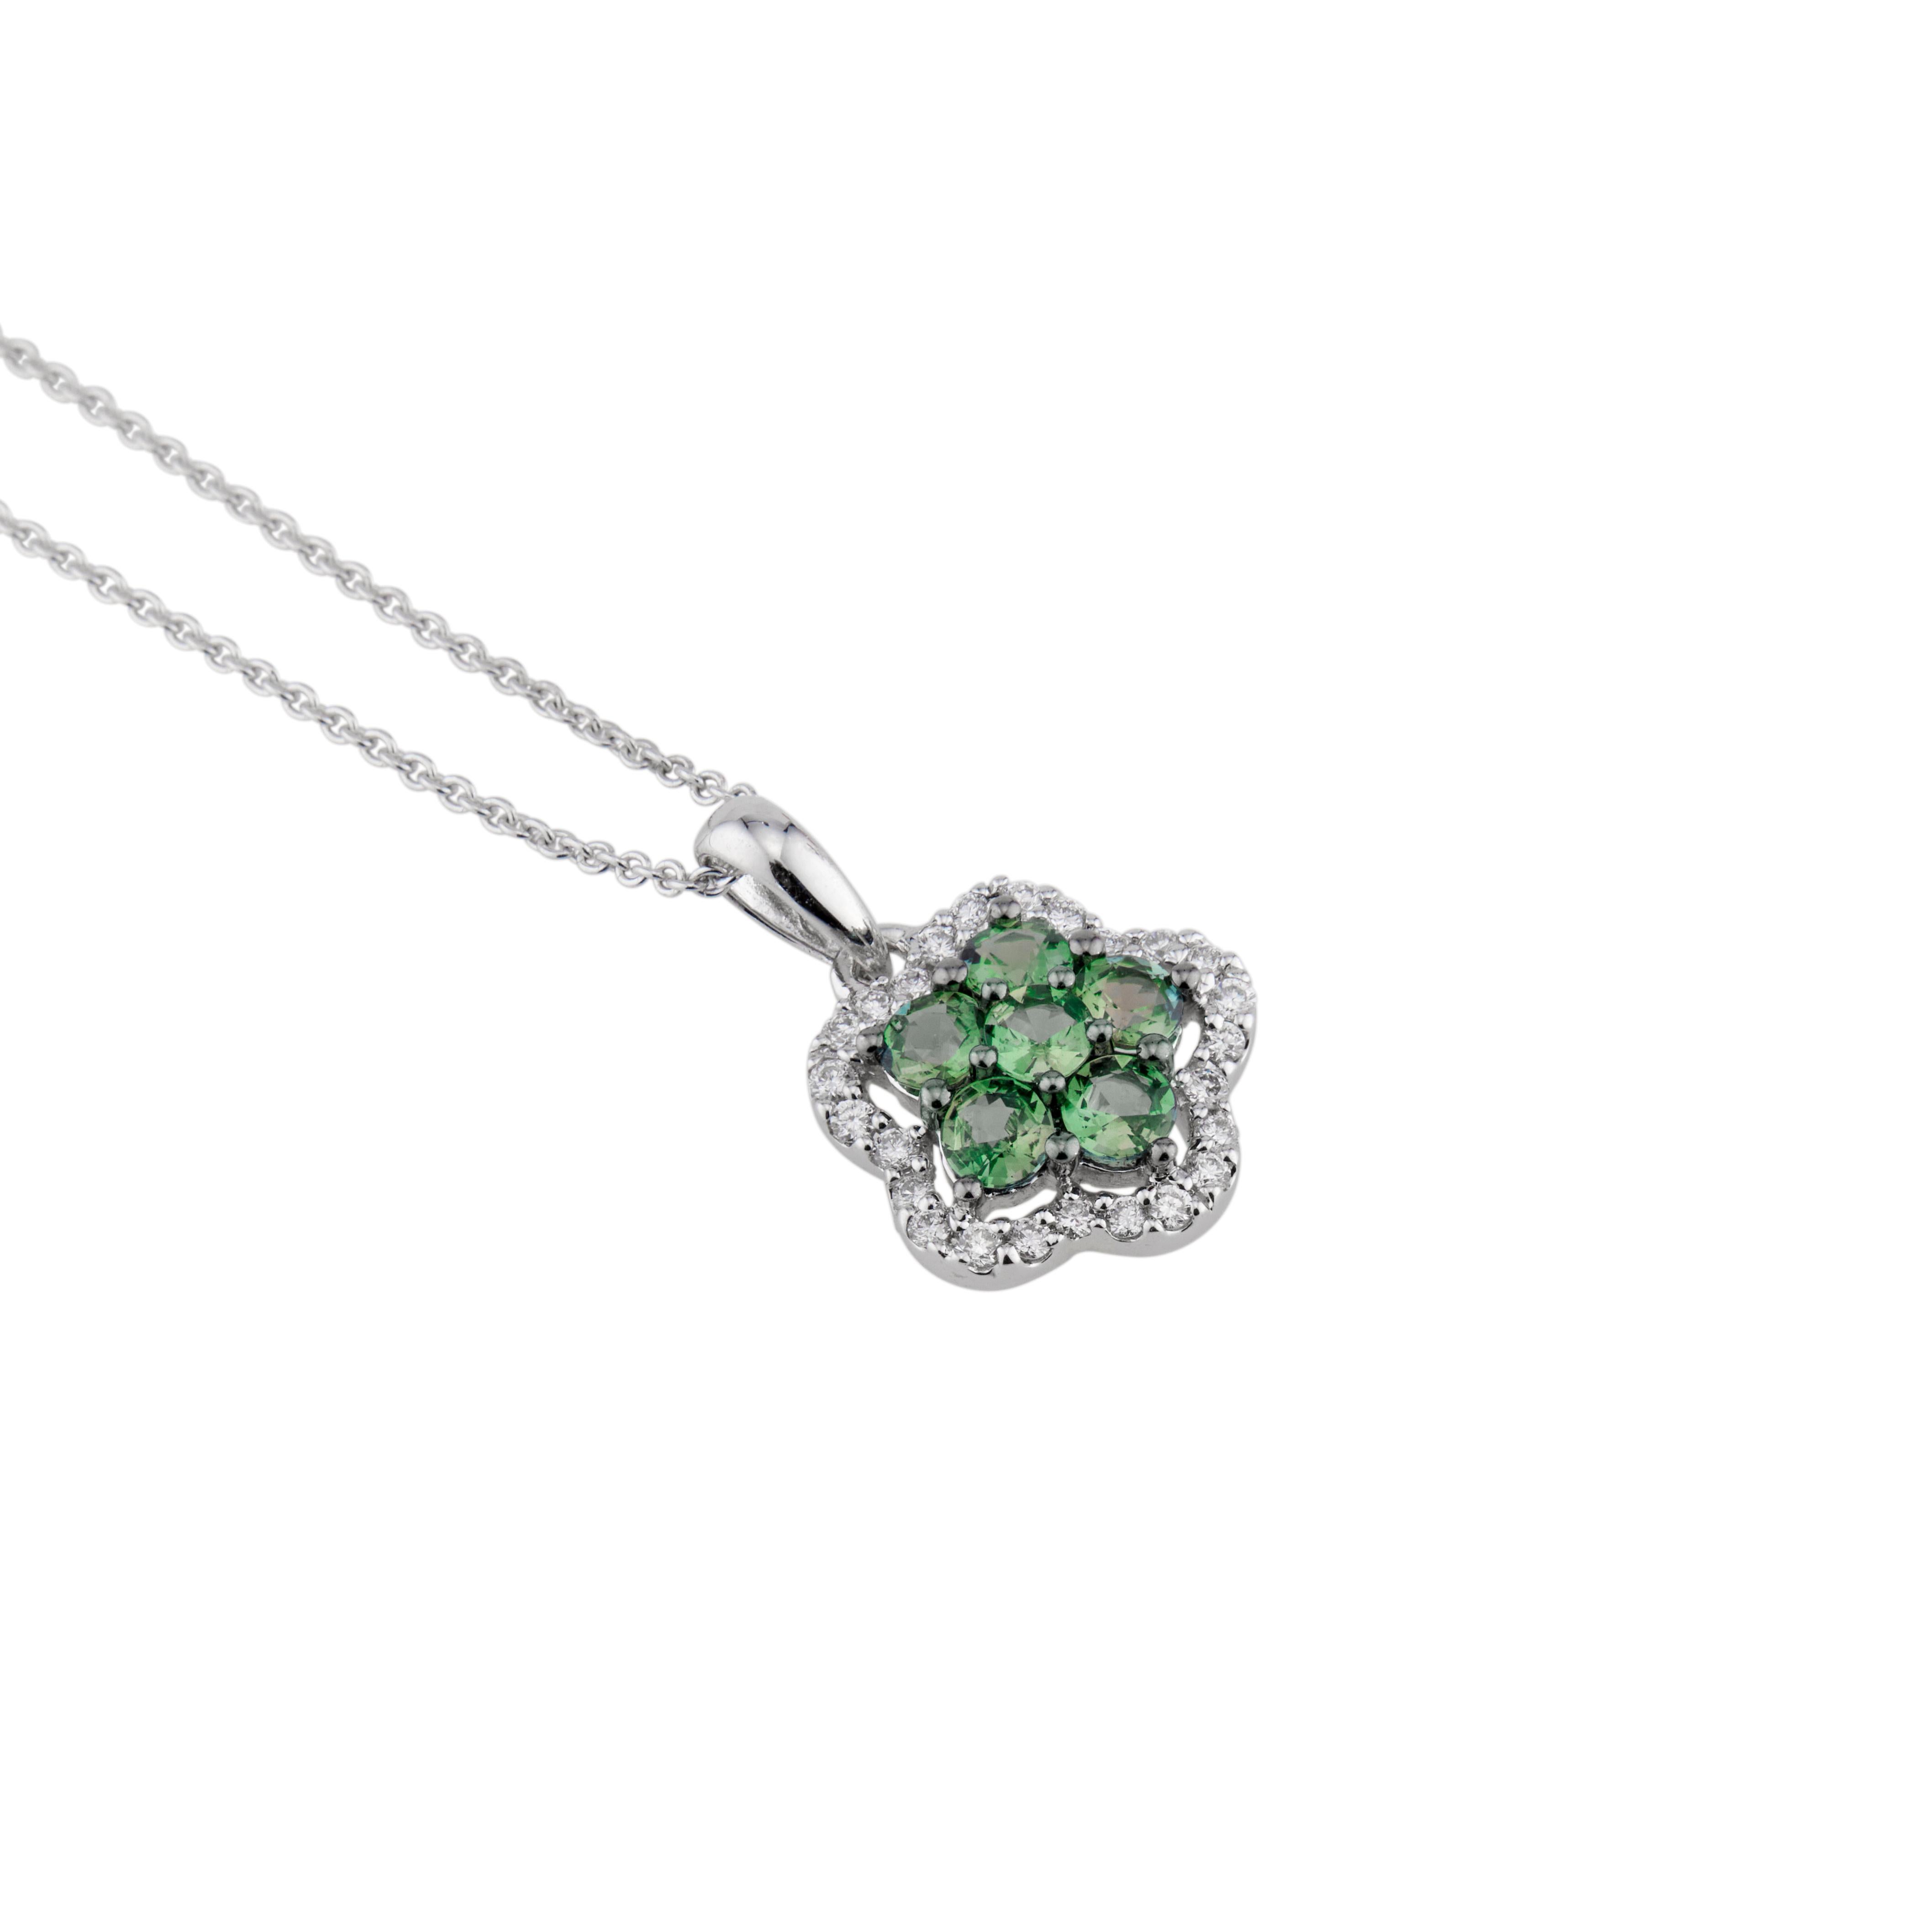 Alexandrite and diamond pendant necklace. 6 round green alexandrite's with a halo of 25 round brilliant cut diamonds. The chain is adjustable to 18 Inches and can be shortened by pulling the heart tag at the end to any length. Stamped D 012 AO 049